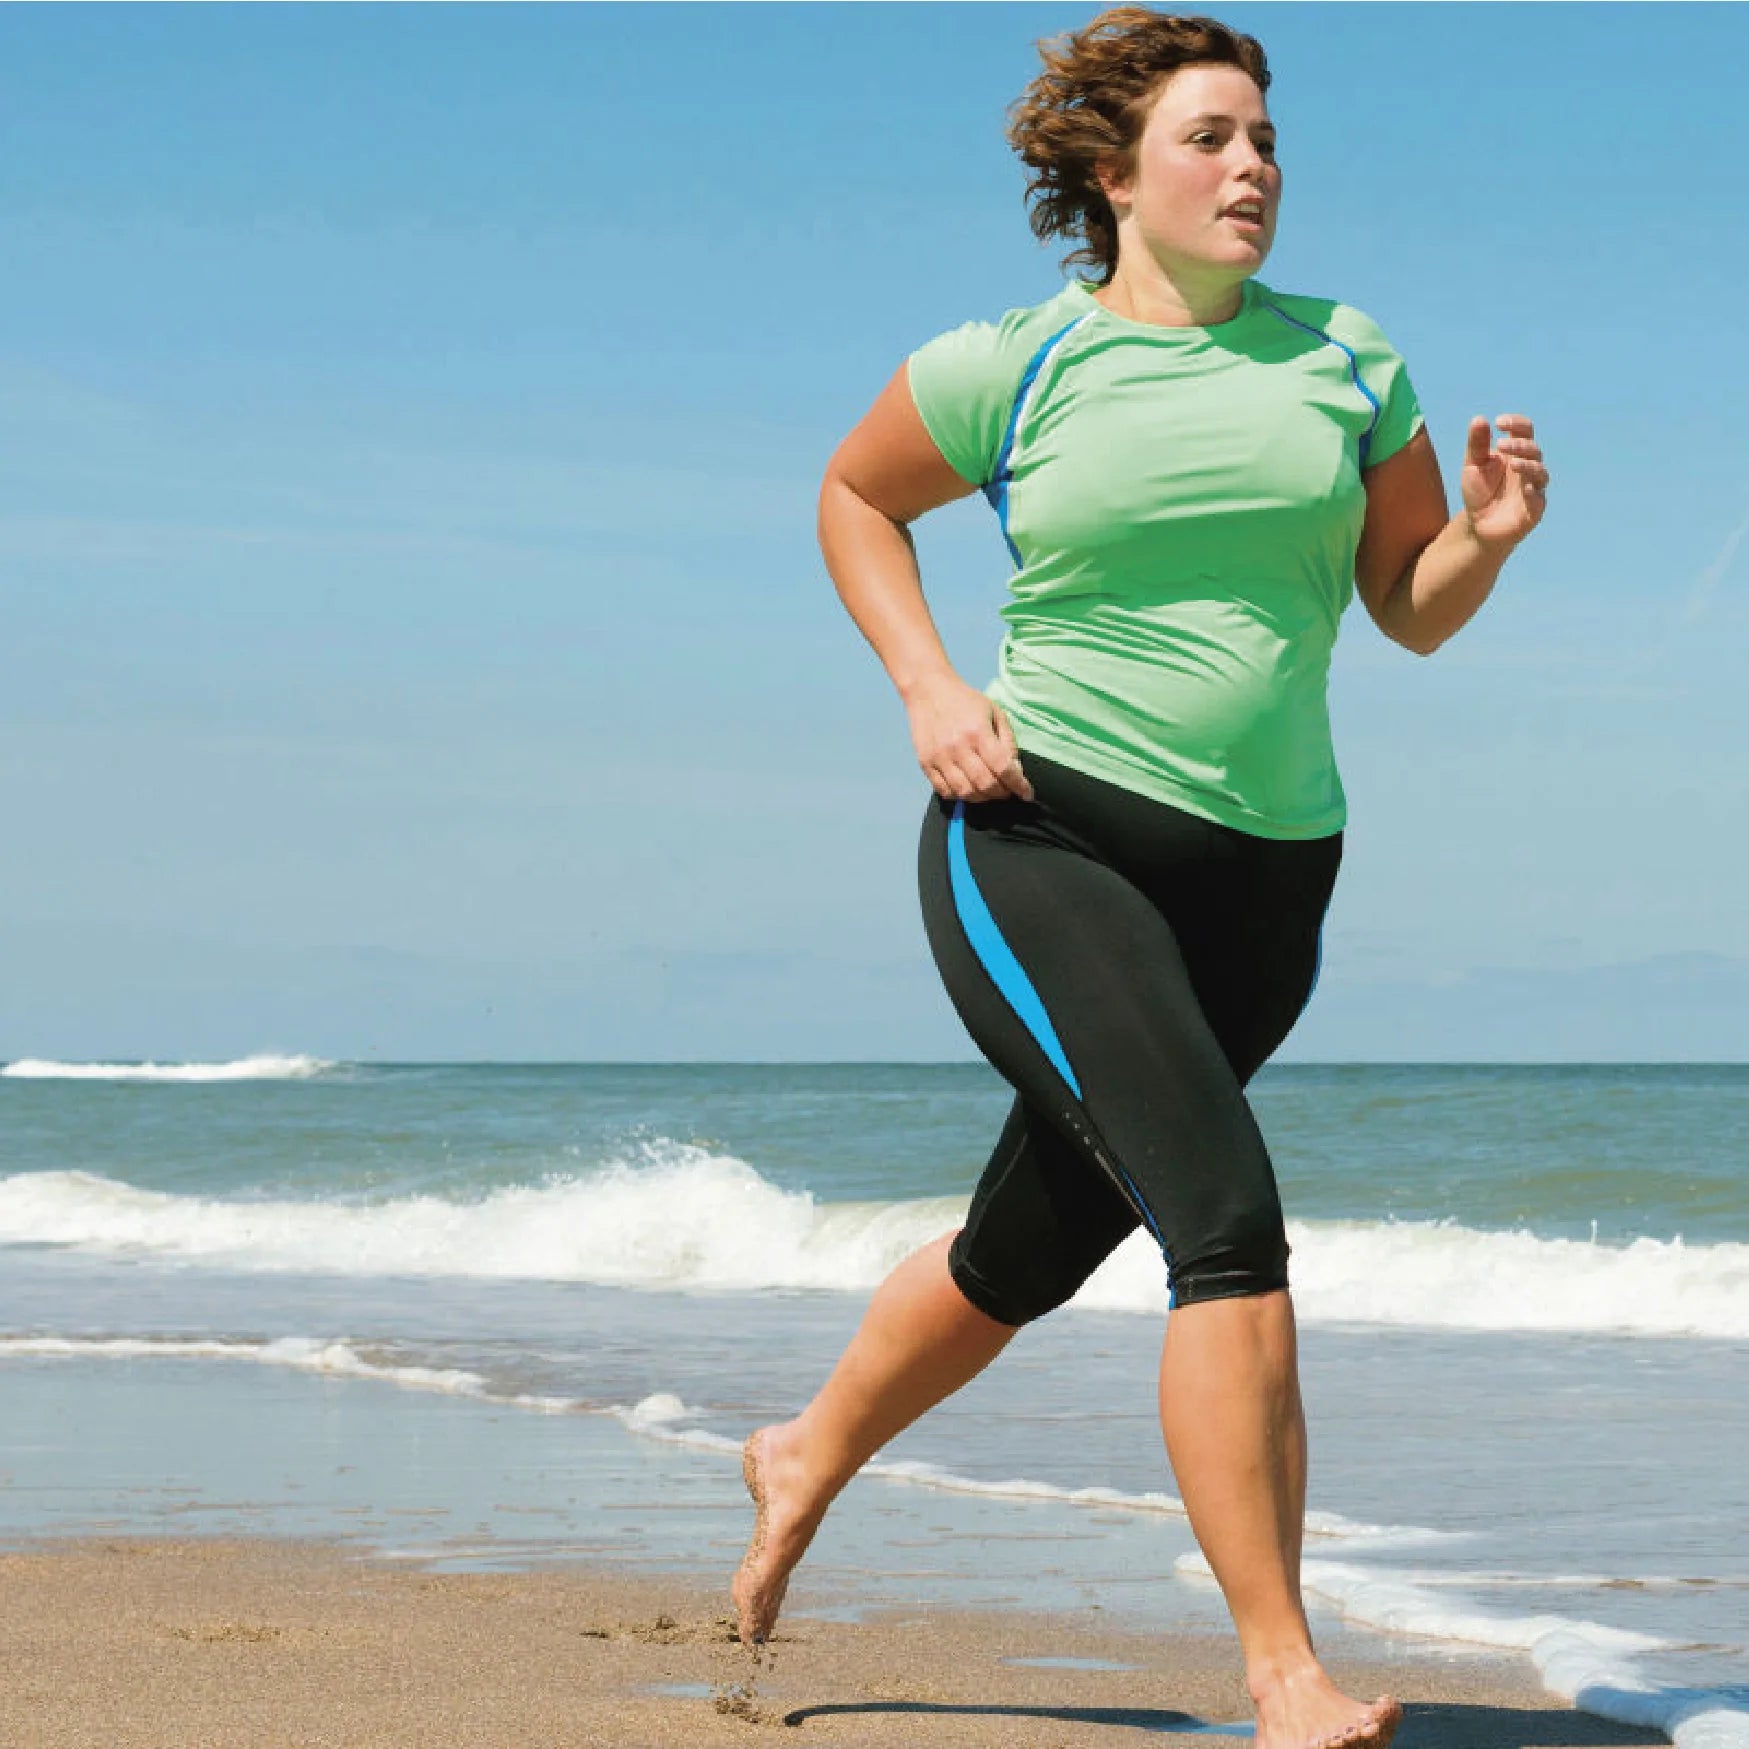 Why should you Exercise after Bariatric Surgery?